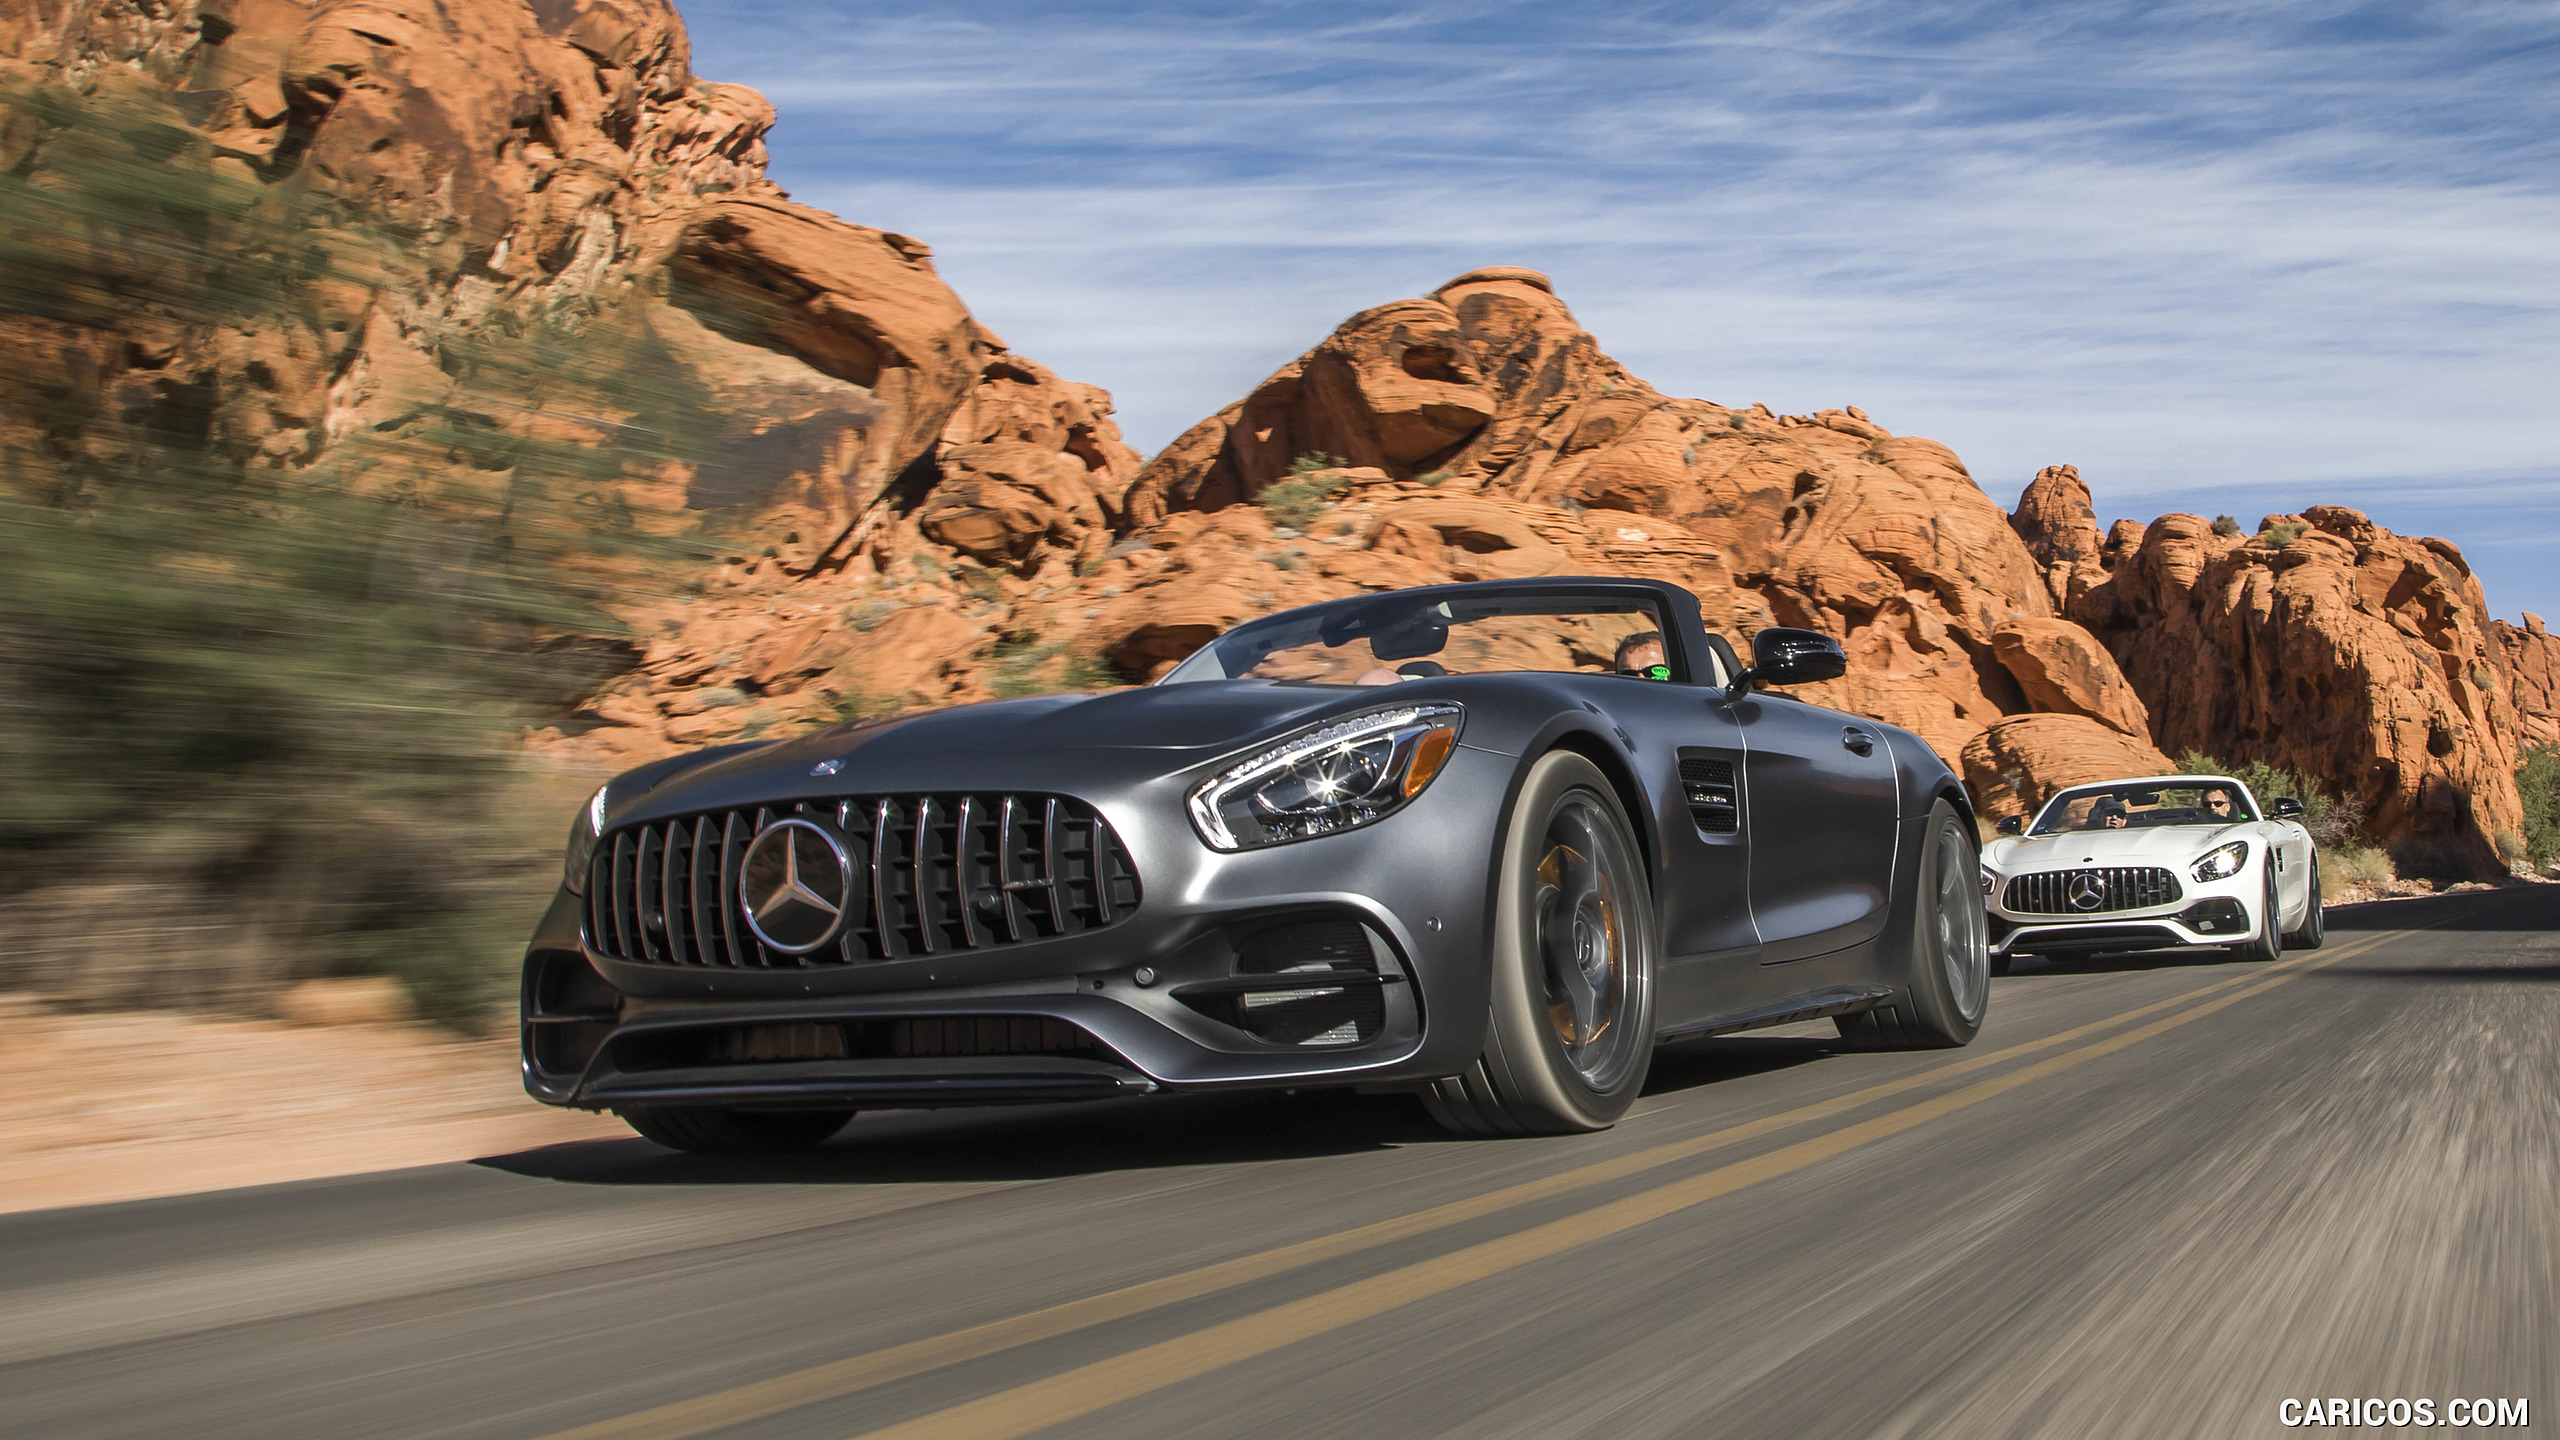 2018 Mercedes-AMG GT and GT C Roadsters - Front Three-Quarter, #51 of 350